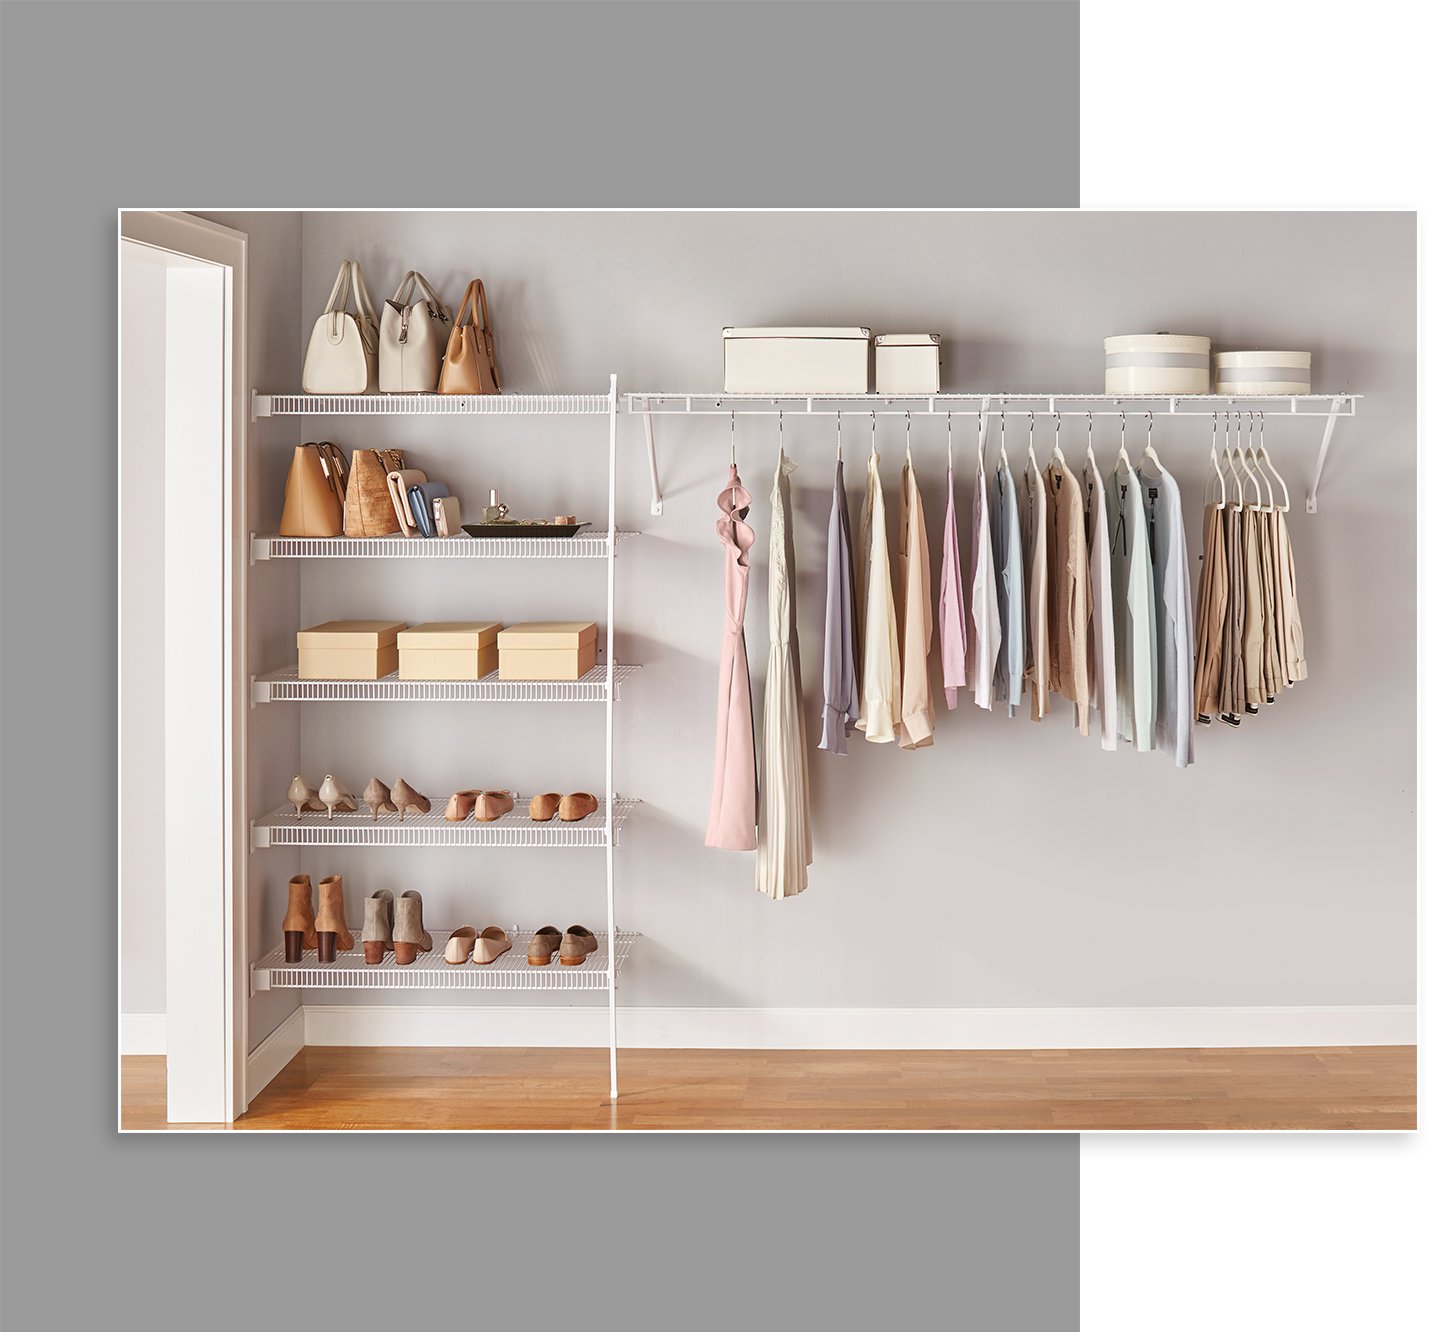 Direct Mount Wire Closet Shelving, Rubbermaid Wire Shelving Hardware